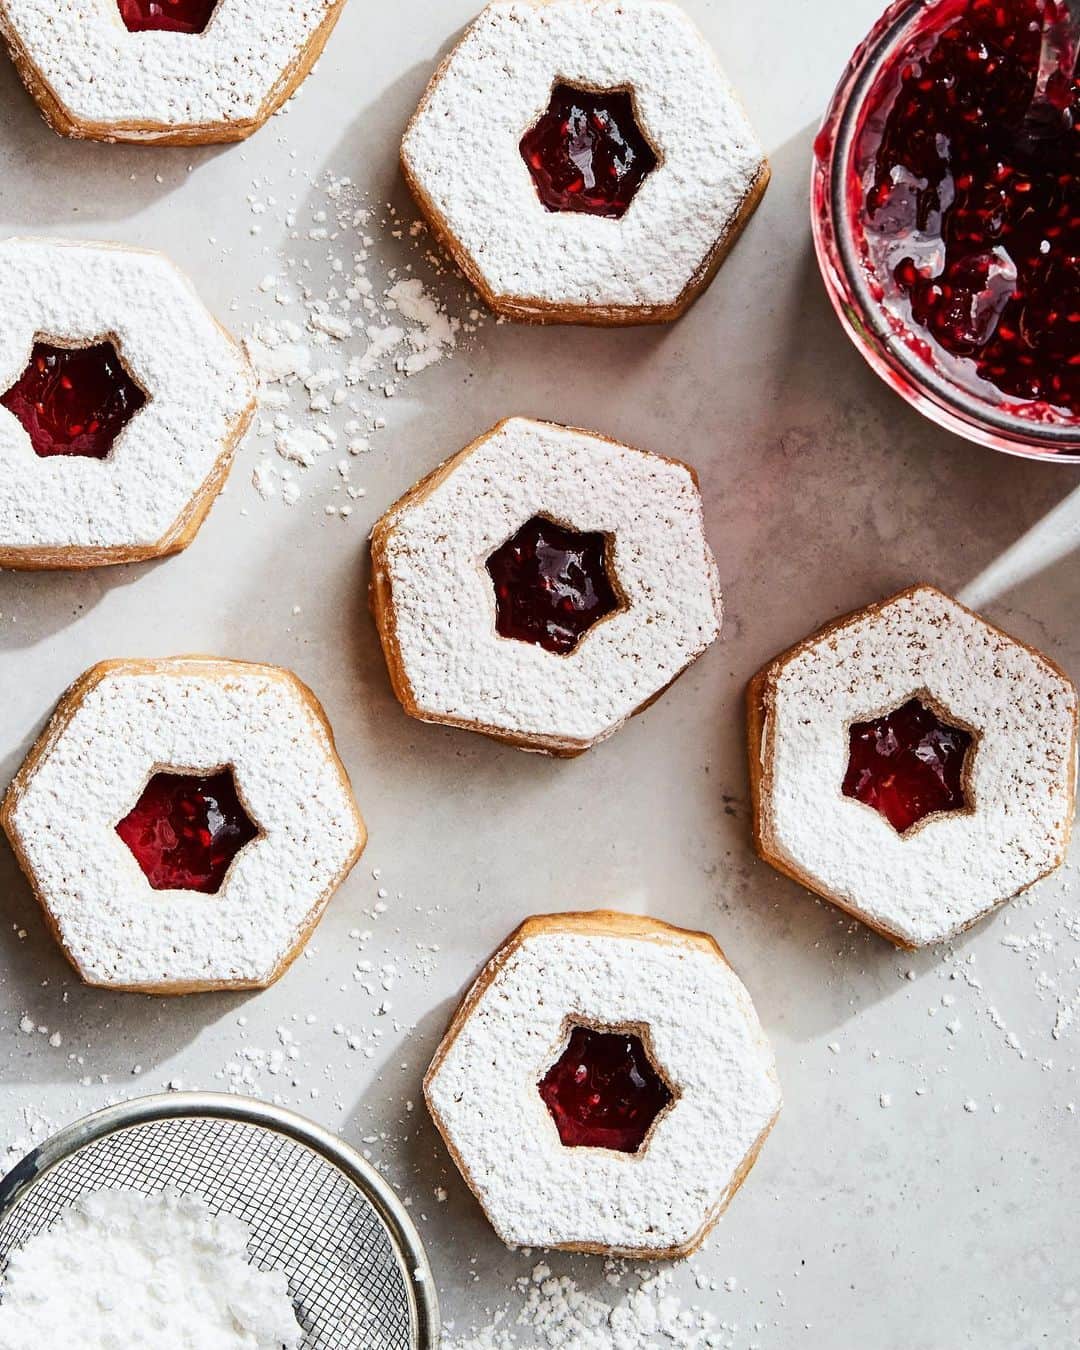 Gaby Dalkinさんのインスタグラム写真 - (Gaby DalkinInstagram)「Guess who’s back with another epic recipe today… my Omi!!! This time we’re making her famous Linzer Christmas Cookies with copious amounts of @bonnemaman_us Raspberry Preserves because OMG THAT STUFF IS WHAT MY DREAMS ARE MADE OF!! Omi used to make these for us every Christmas when we were kids and they are truly perfection! I cannot WAIT until next year when she can make them for me again in real life!! Recipe is below and it’s the perfect way to spend some time in your kitchen this week/weekend. ALSO - bonus, you can re-use / up-cycle the Bonne Maman glass jar and fill it up to gift to your friends and fam. But also I 100% won’t judge you if you keep the cookies for yourselves. FYI - legit any other flavor of Bonne Maman is brilliant in this recipe. I basically tested them all. DON’T JUDGE ME. It’s a tough job but someone’s gotta do it!  3 cups flour 3/4 cup sugar 1 1/2 cups butter (softened) 2 tablespoons water 1/4 teaspoon salt 1 teaspoon vanilla extract 3/4 cup Bonne Maman Raspberry Preserves (or any other of your fav Bonne Maman preserves) Powdered sugar for dusting   Cream together the butter, sugar and vanilla until just combined in a stand mixer.   Add the flour, water and salt and mix on low speed until the dough comes together in a cohesive mass. Turn the dough out onto your work surface and shape into a flat disk. Wrap with plastic wrap and place in the fridge for at least 30 minutes.   Roll the dough out to a uniform 1/4- inch thickness and, using a cookie cutter, cut rounds. Using a smaller cookie cutter, make holes in the middle of half of your rounds.   Place cookies on a parchment lined baking sheet and chill for an additional 15 minutes prior to baking. Preheat the oven to 350 degrees.   Bake the cookies for 20 - 25 minutes, until the edges begin to brown. Once cooked, remove from the oven and allow the cookies to cool to room temperature on a cooling rack.   Dust the cut out cookies with powdered sugar and spread the Bonne Maman Raspberry Preserves on each solid cookie, about 1/2 - 1 tablespoons each. Sandwich your cookies together and serve, or gift to loved ones in an upcycled Bonne Maman jar for the perfect holiday gift 🎁」12月4日 4時49分 - whatsgabycookin